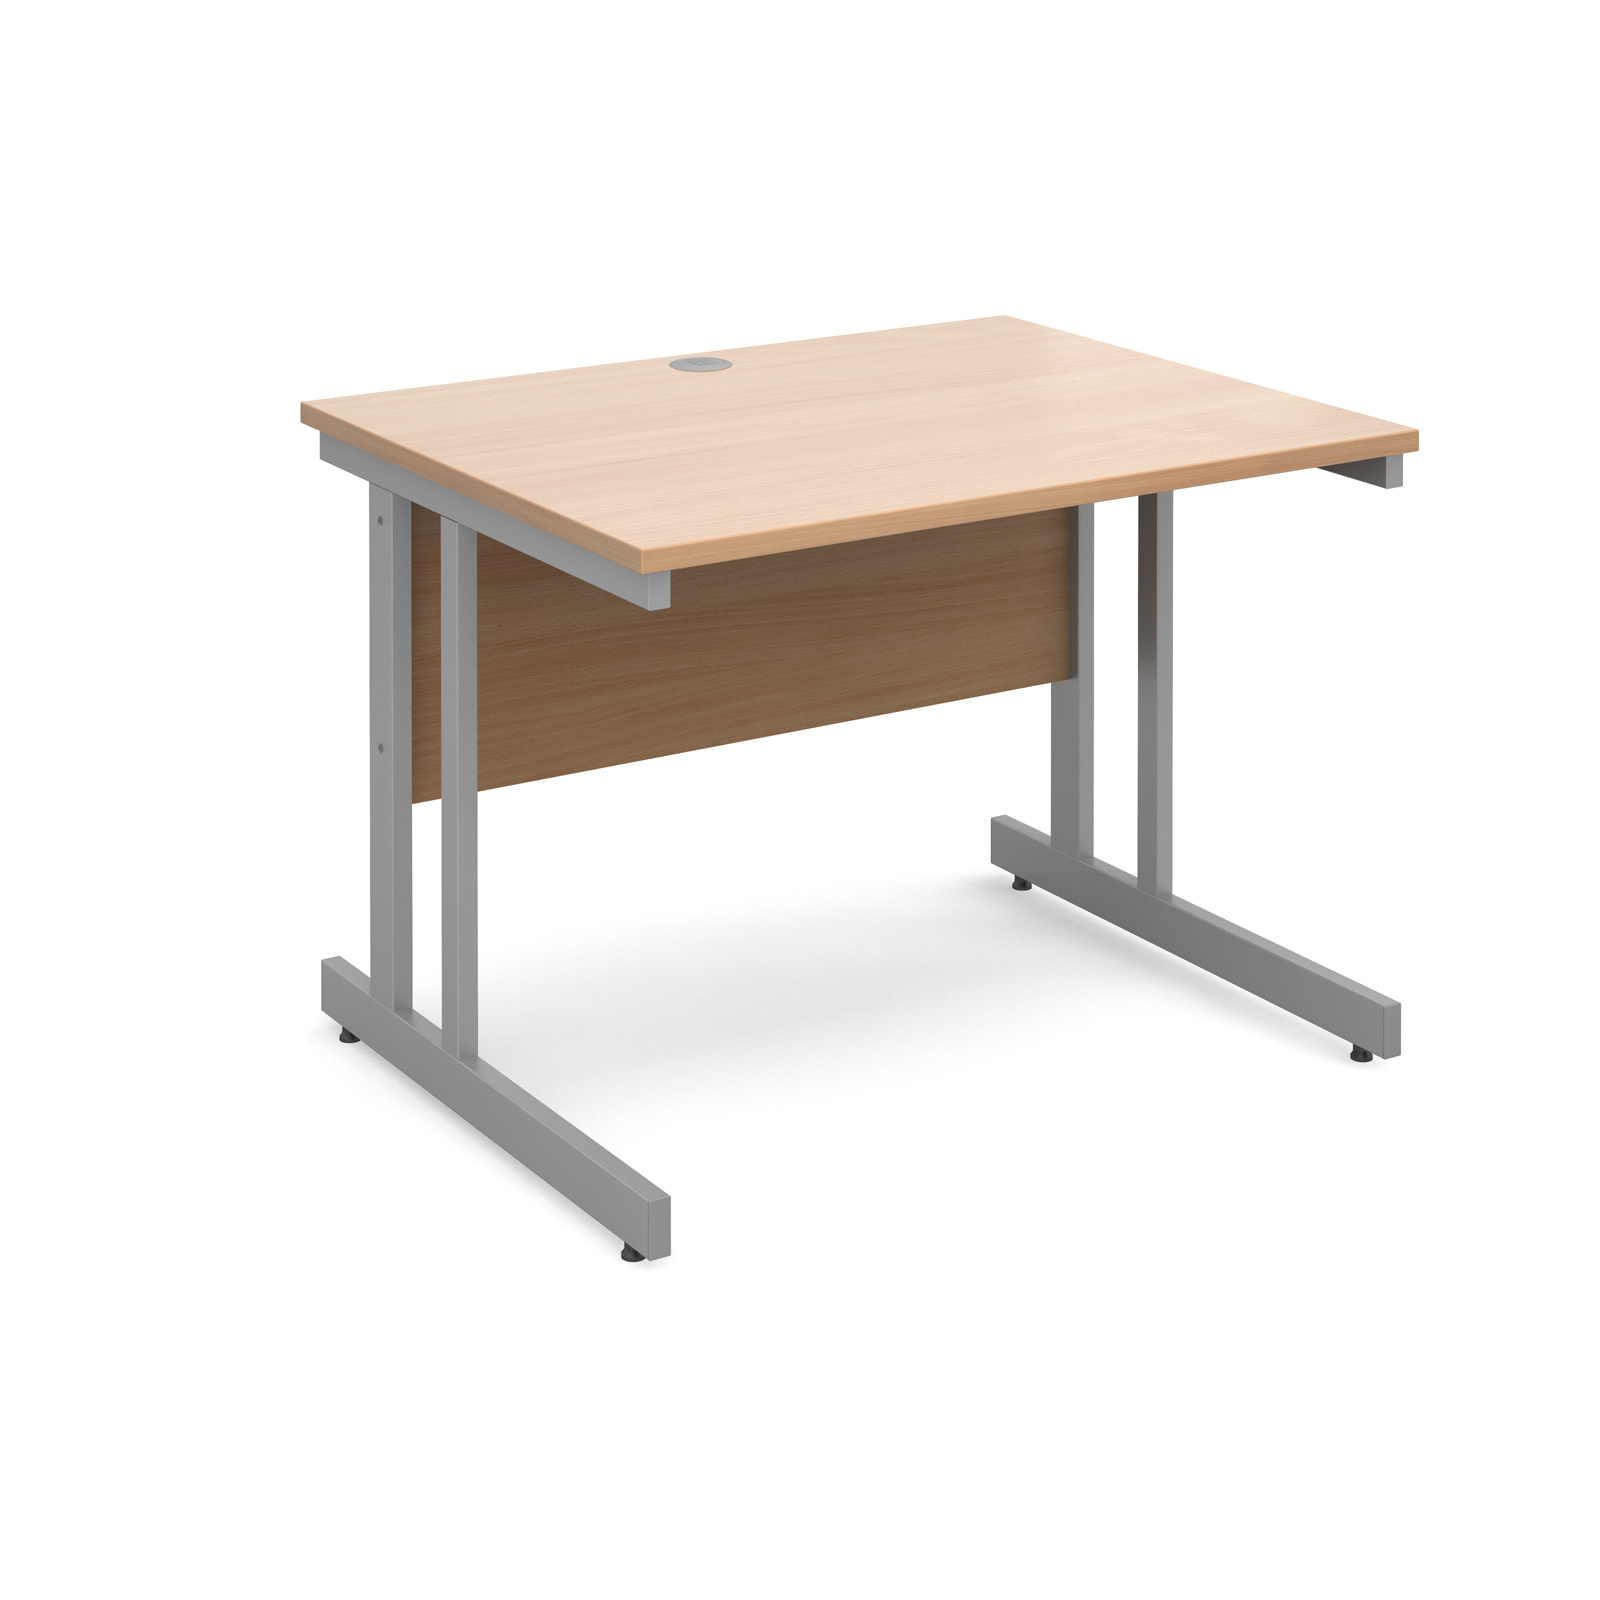 Momento straight desk 1000mm x 800mm - silver cantilever frame, beech top